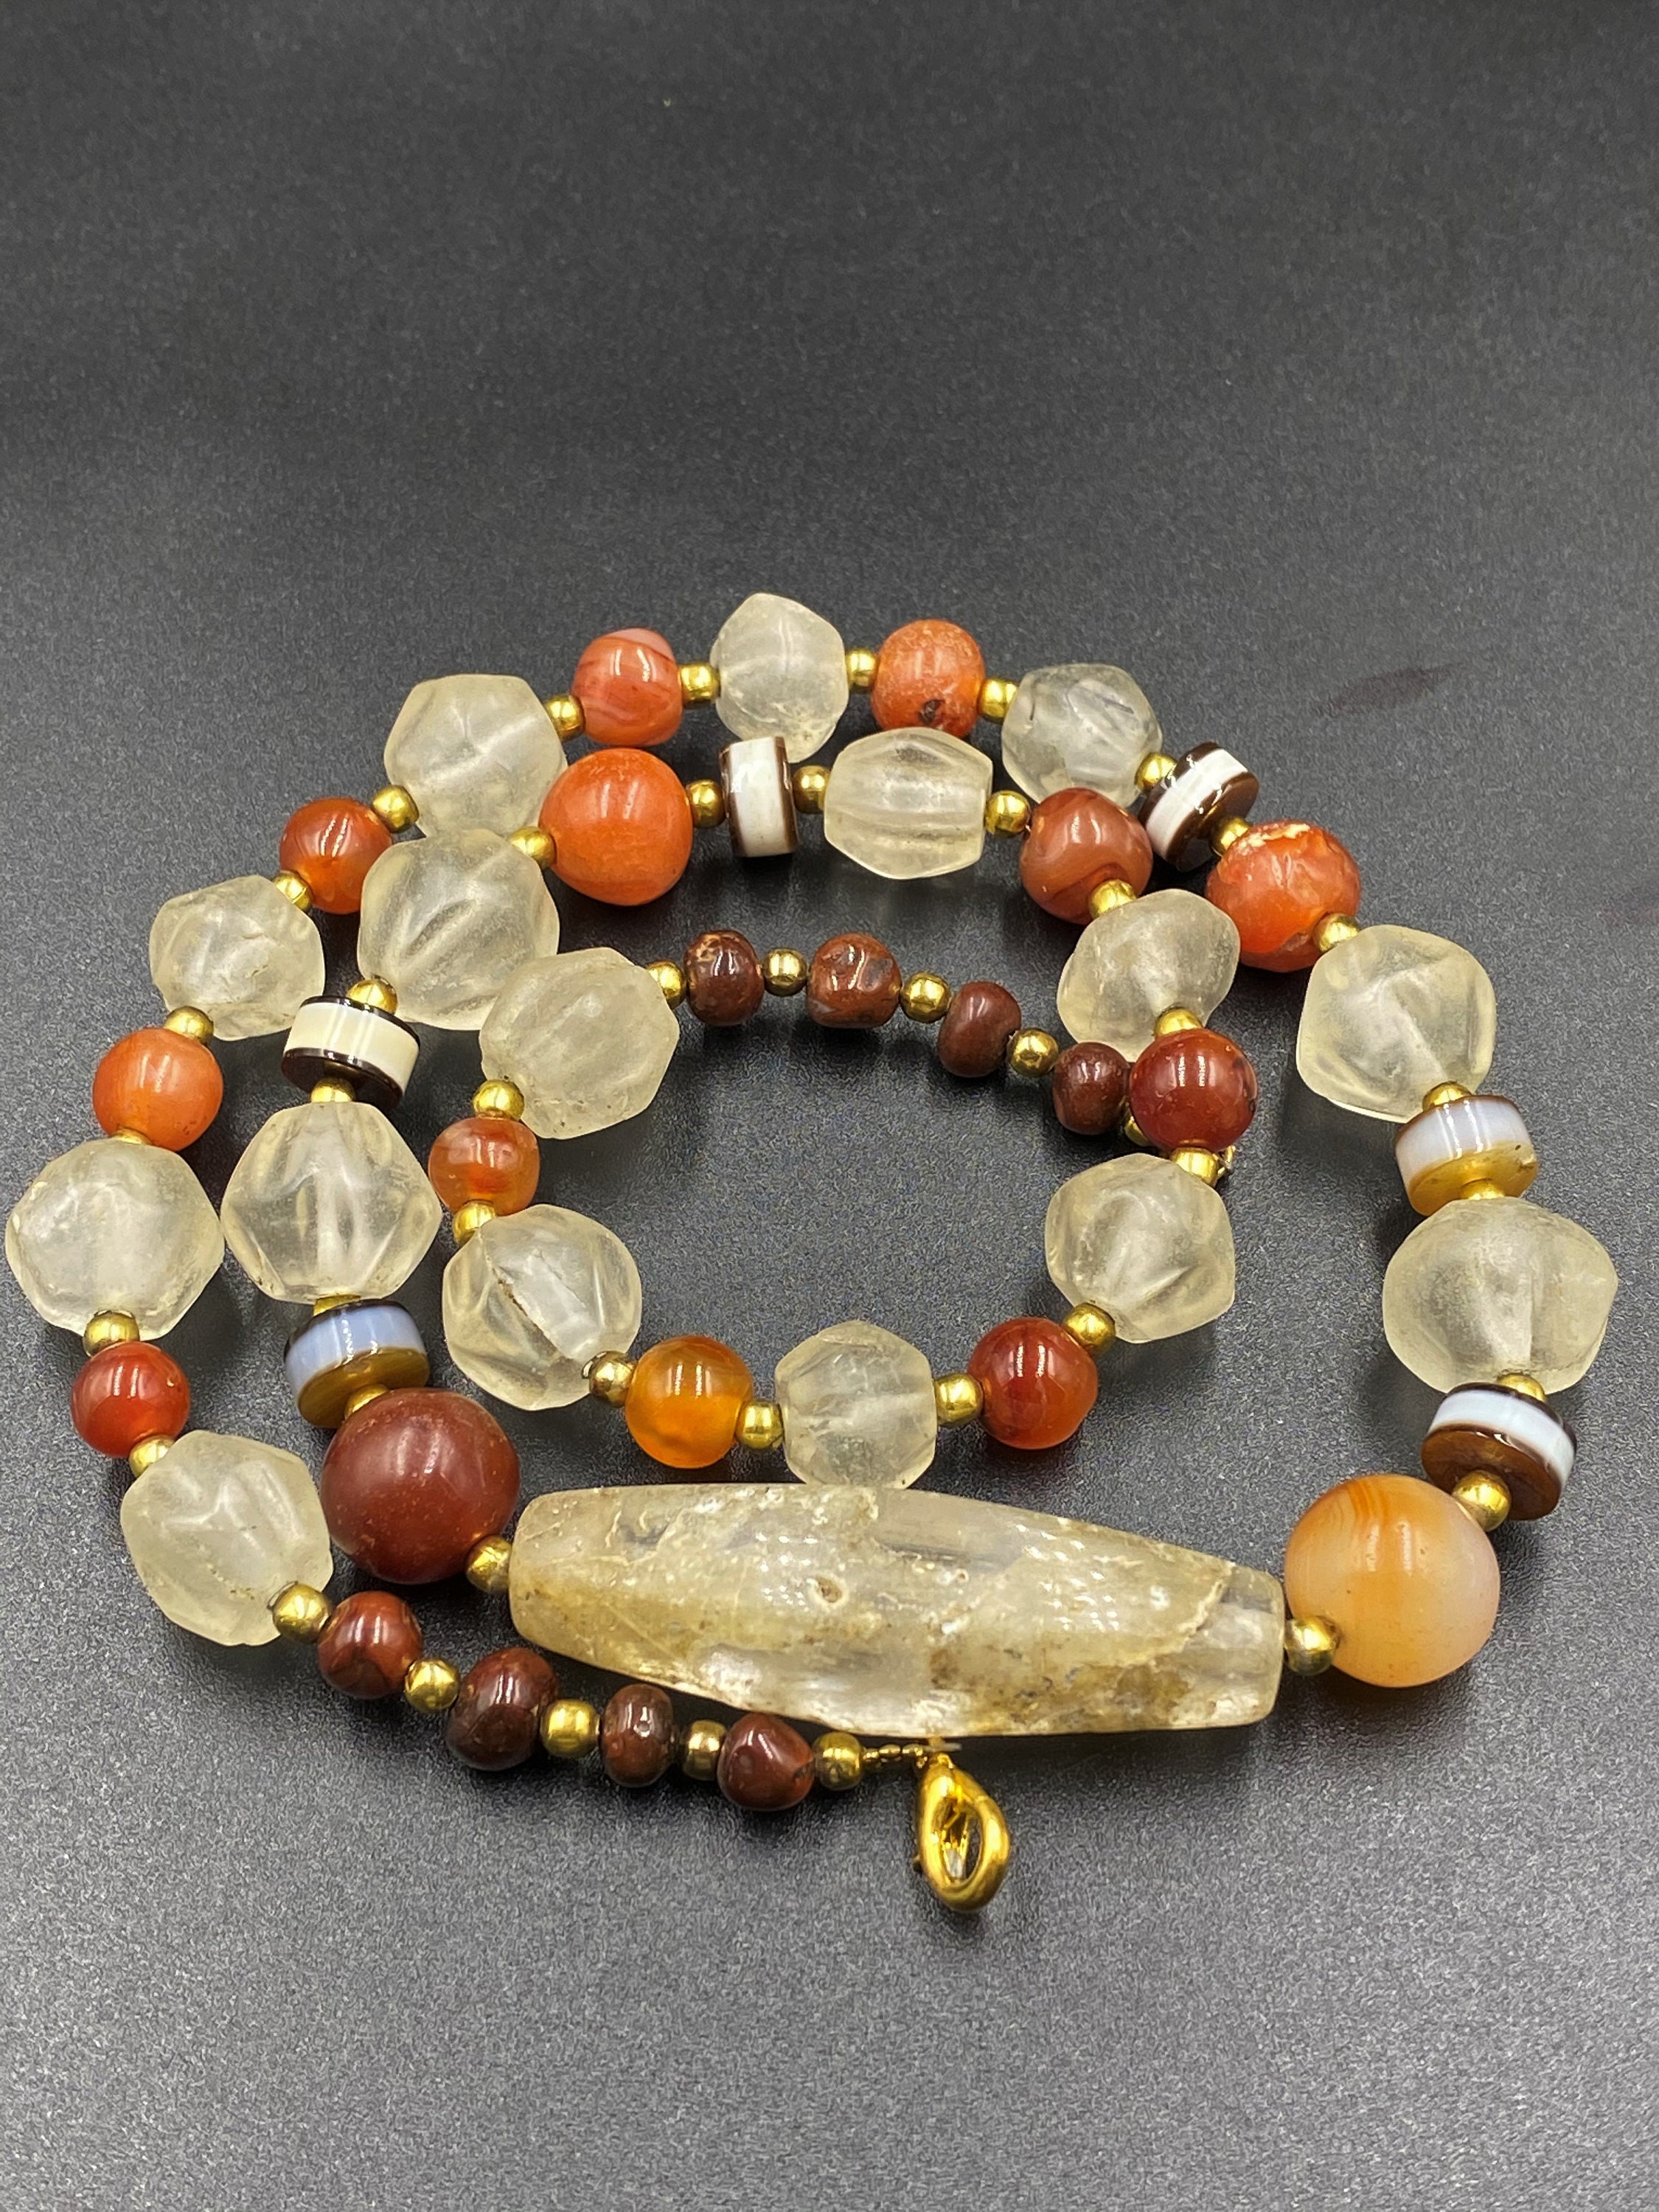 Himalayan Crystals and Carnelian Agate Beads From Ancient Civilizations ...